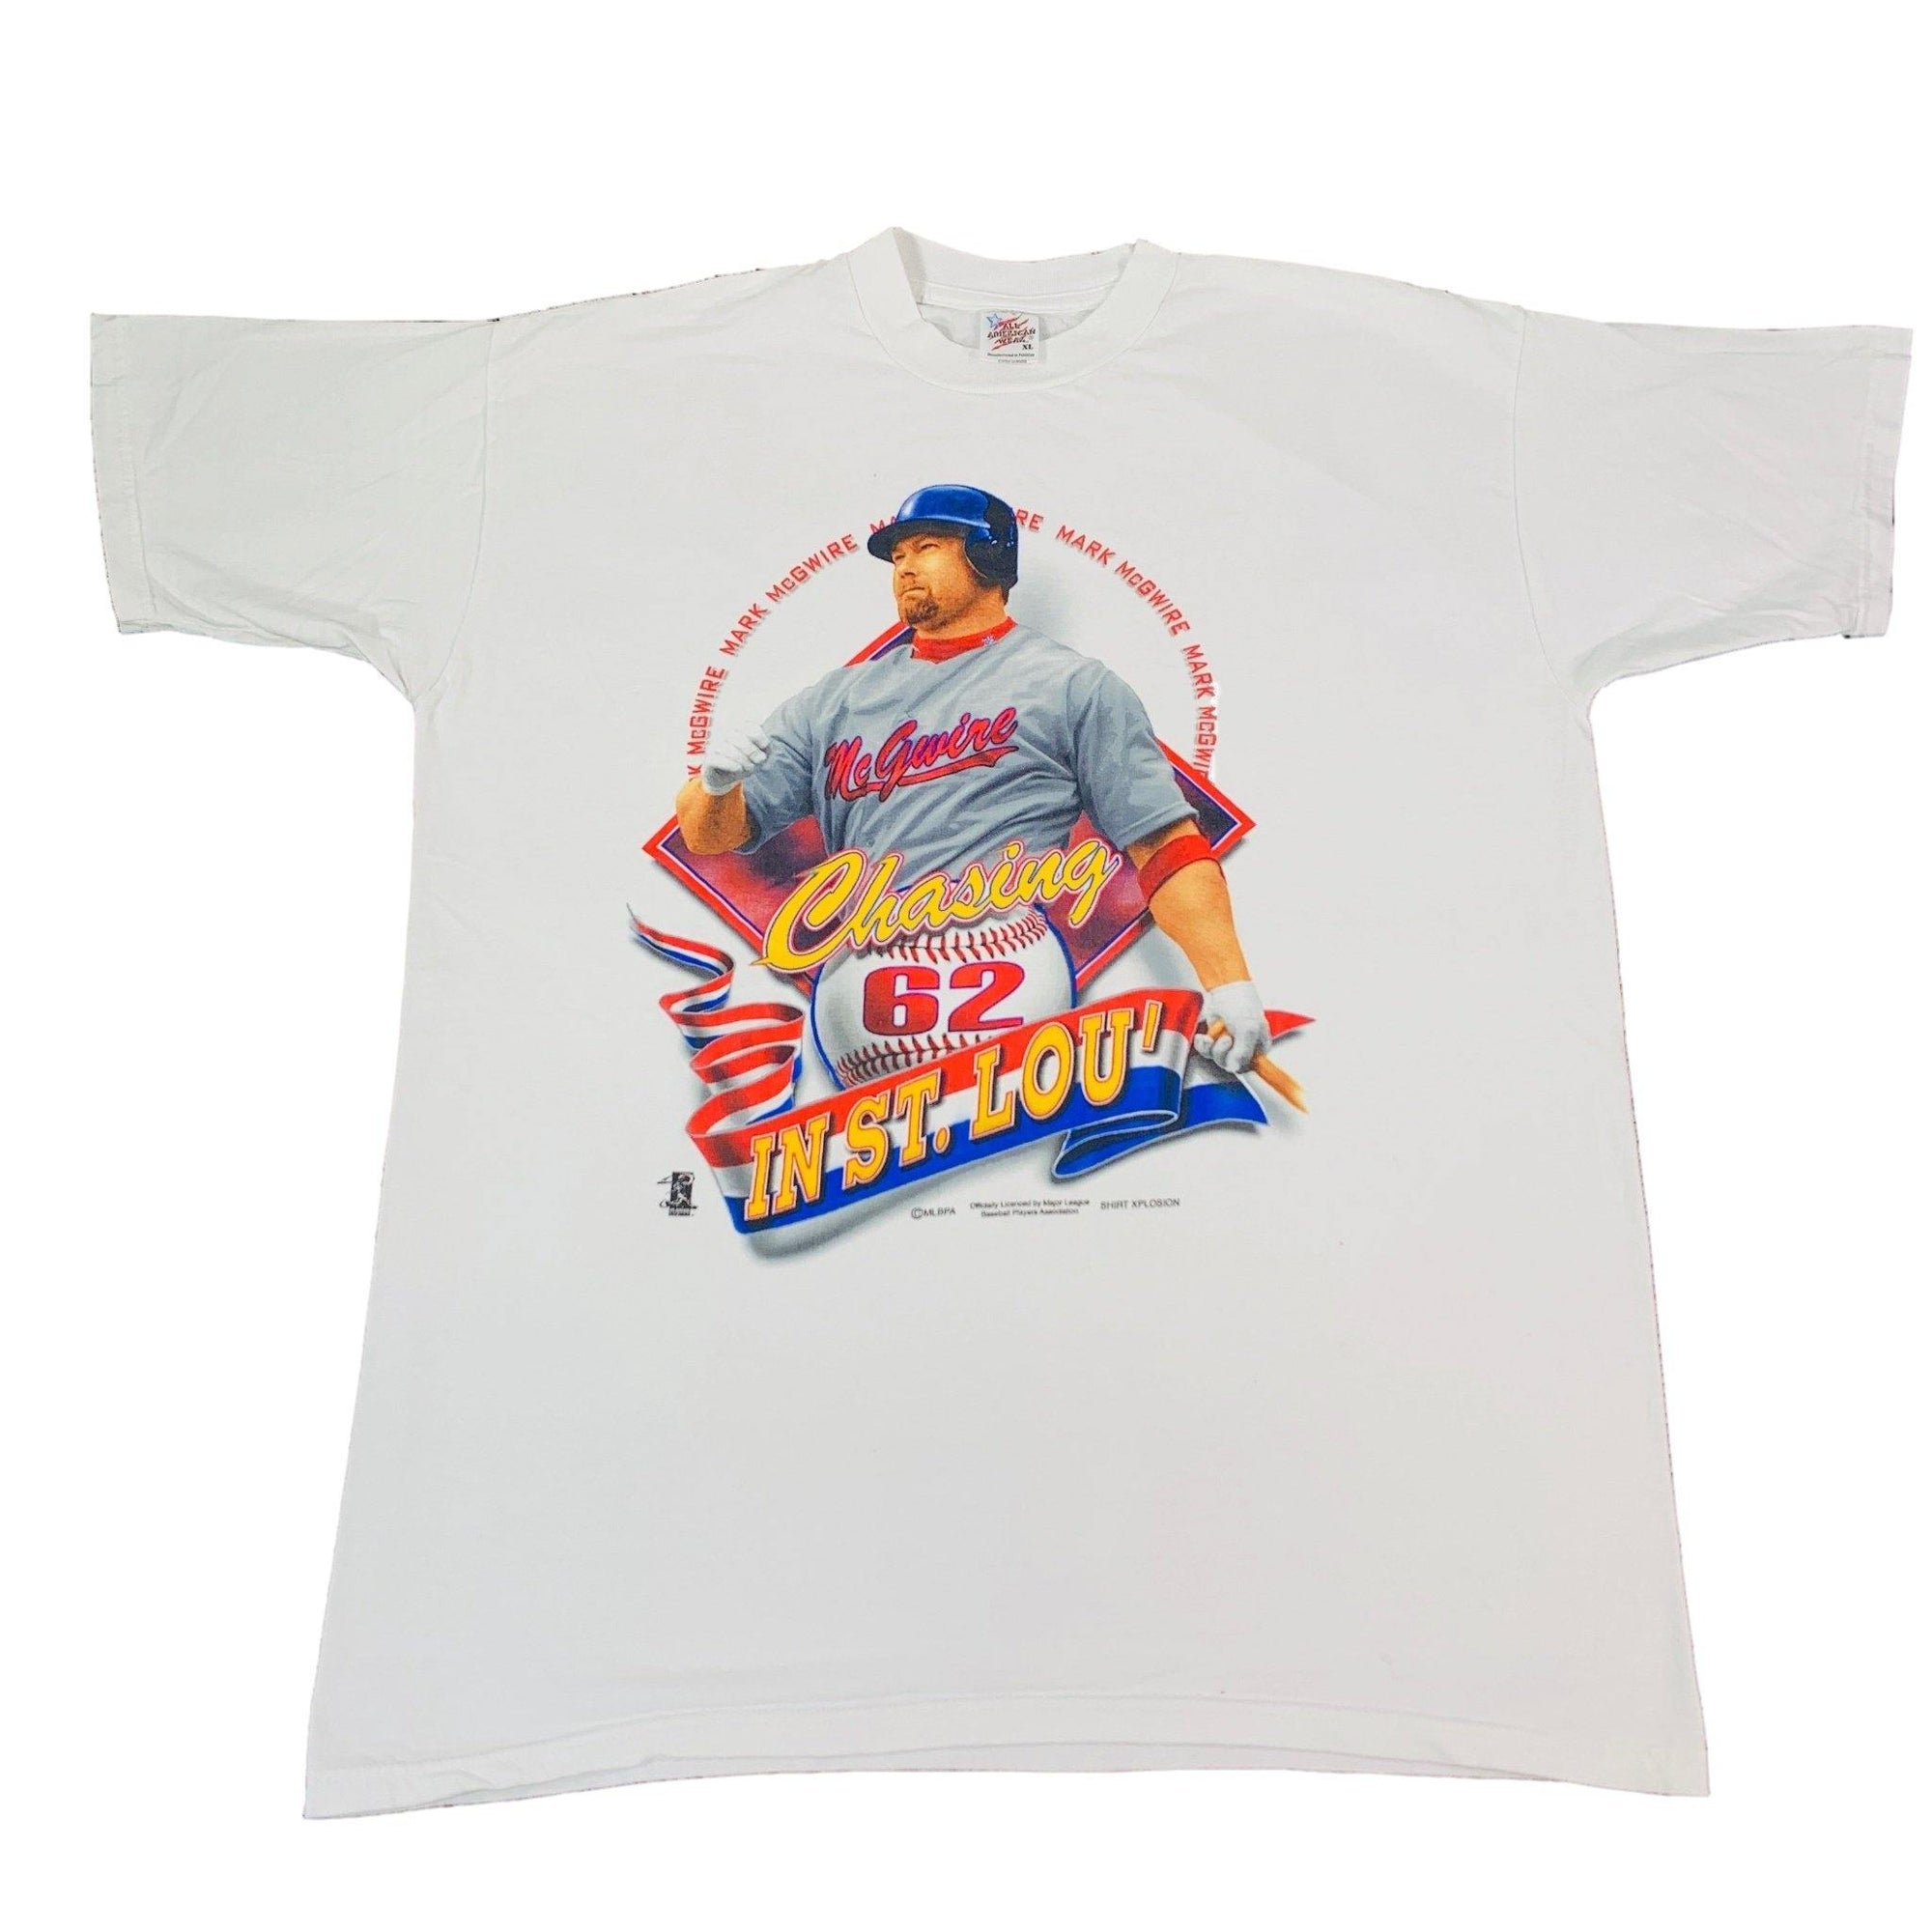 Vintage Mark McGwire "Chasing In St. Lou" T-Shirt - jointcustodydc